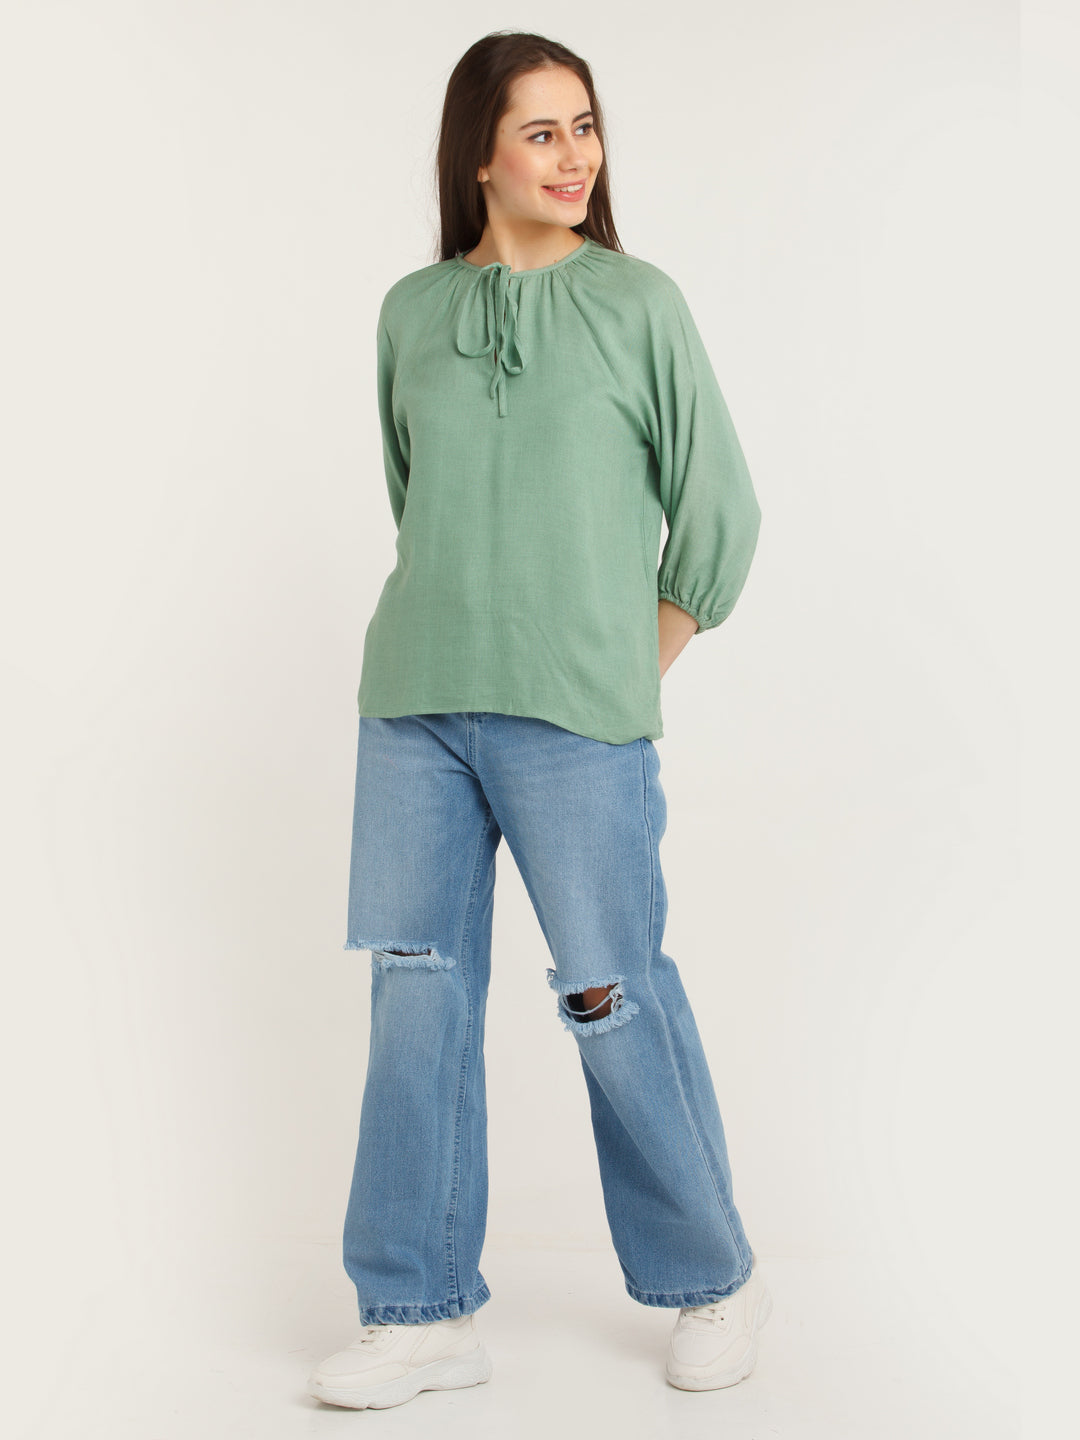 Green Solid Tie-Up Top For Women